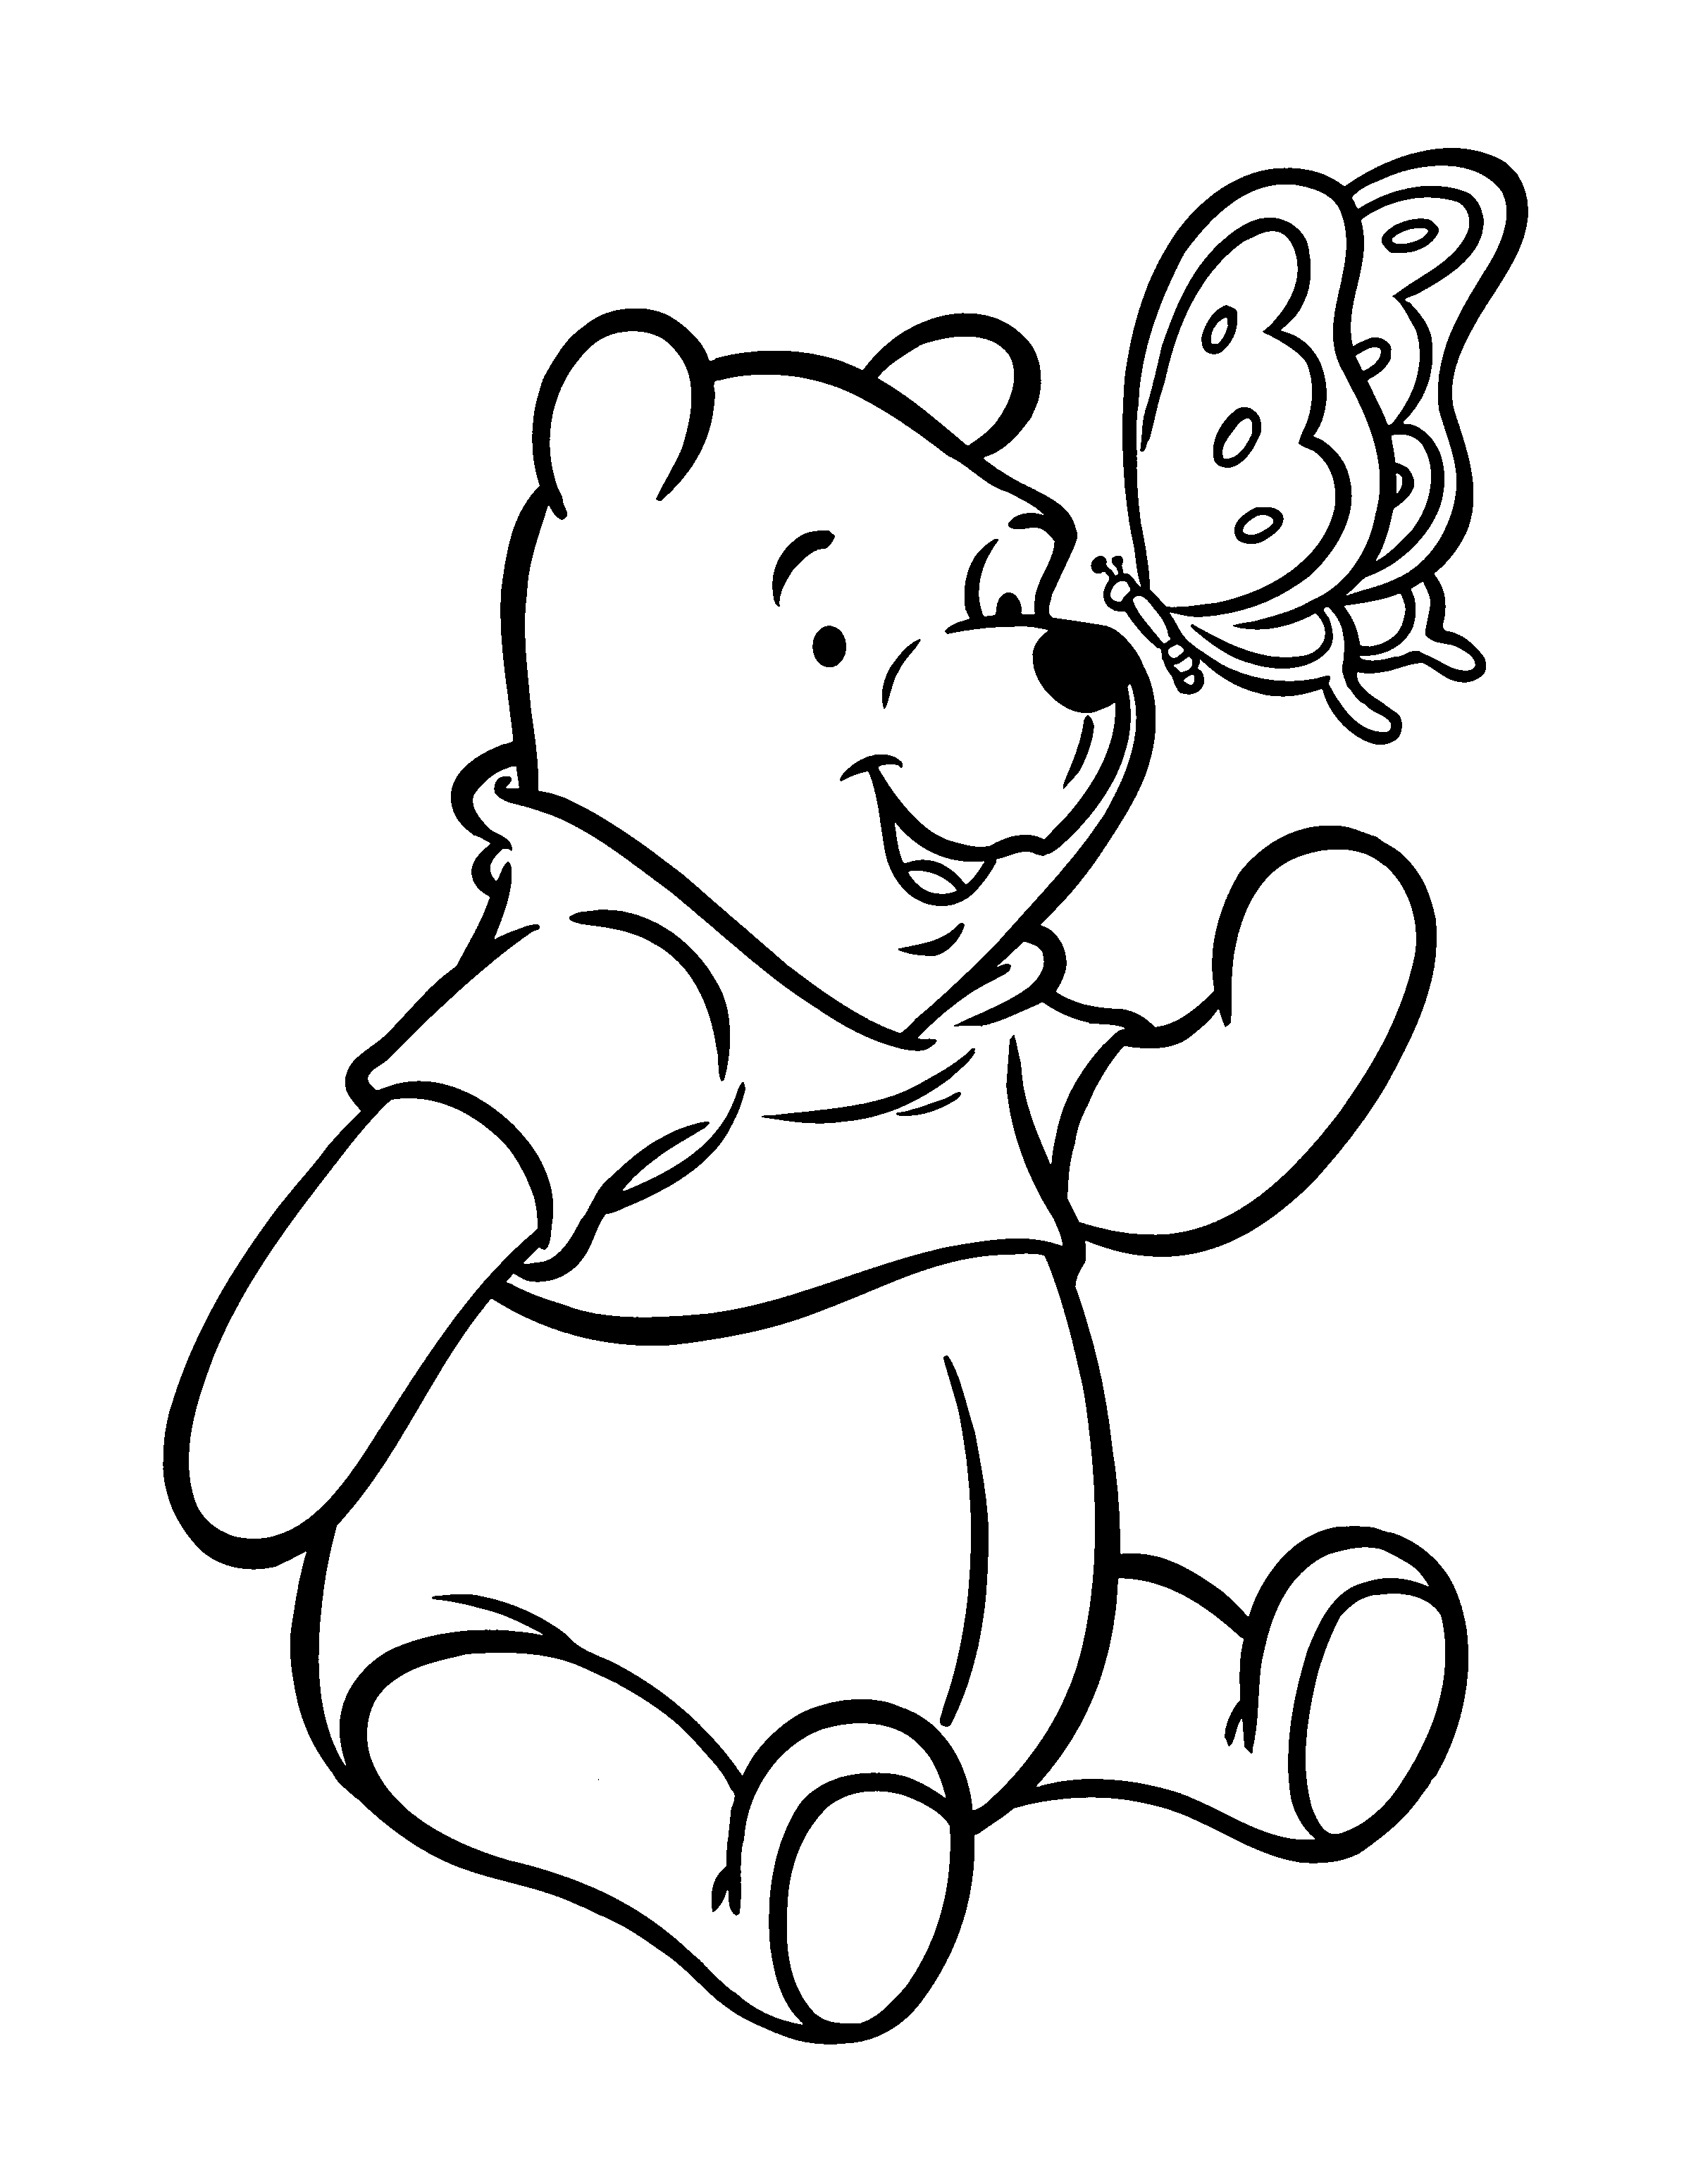 winnie the pooh coloring page